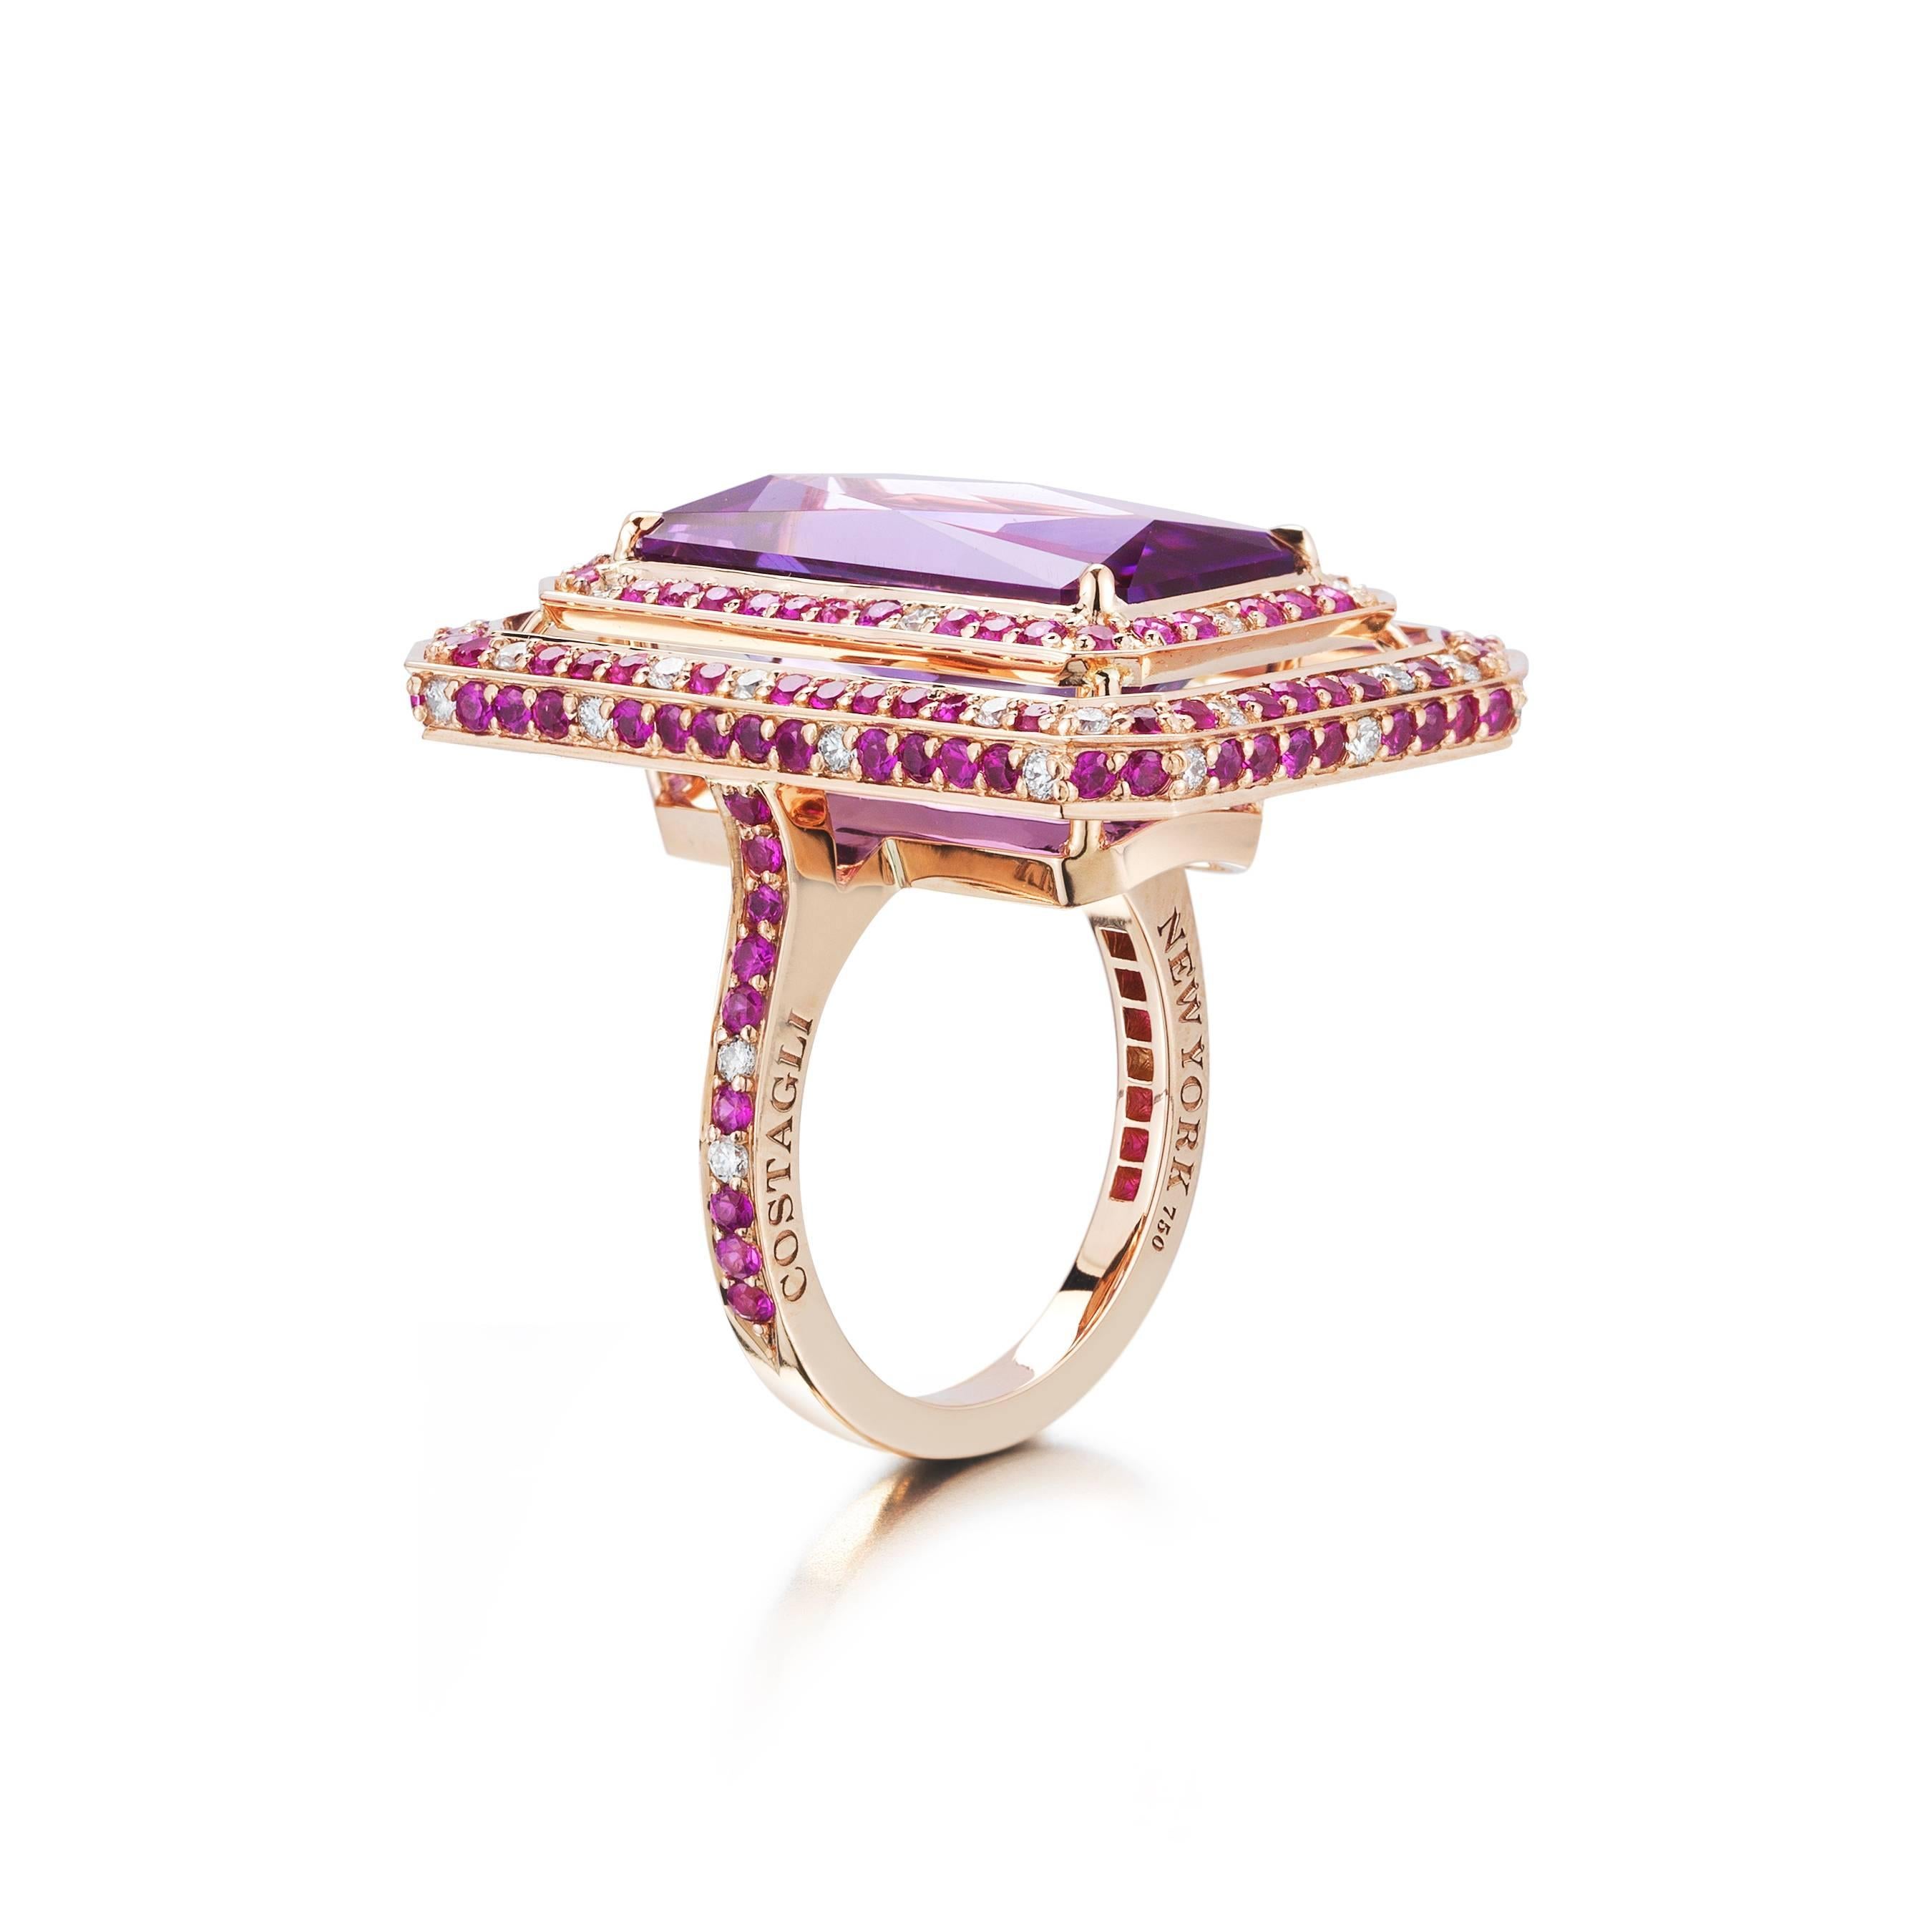 One of a kind octagonal shape amethyst ring, weighing 9.77 carats, in 18kt rose gold surrounded by a double line of pink sapphires, weighing 2.27 carats and round, brilliant white diamonds, weighing 0.44 carats.

Amethyst: 9.77 carats
Pink